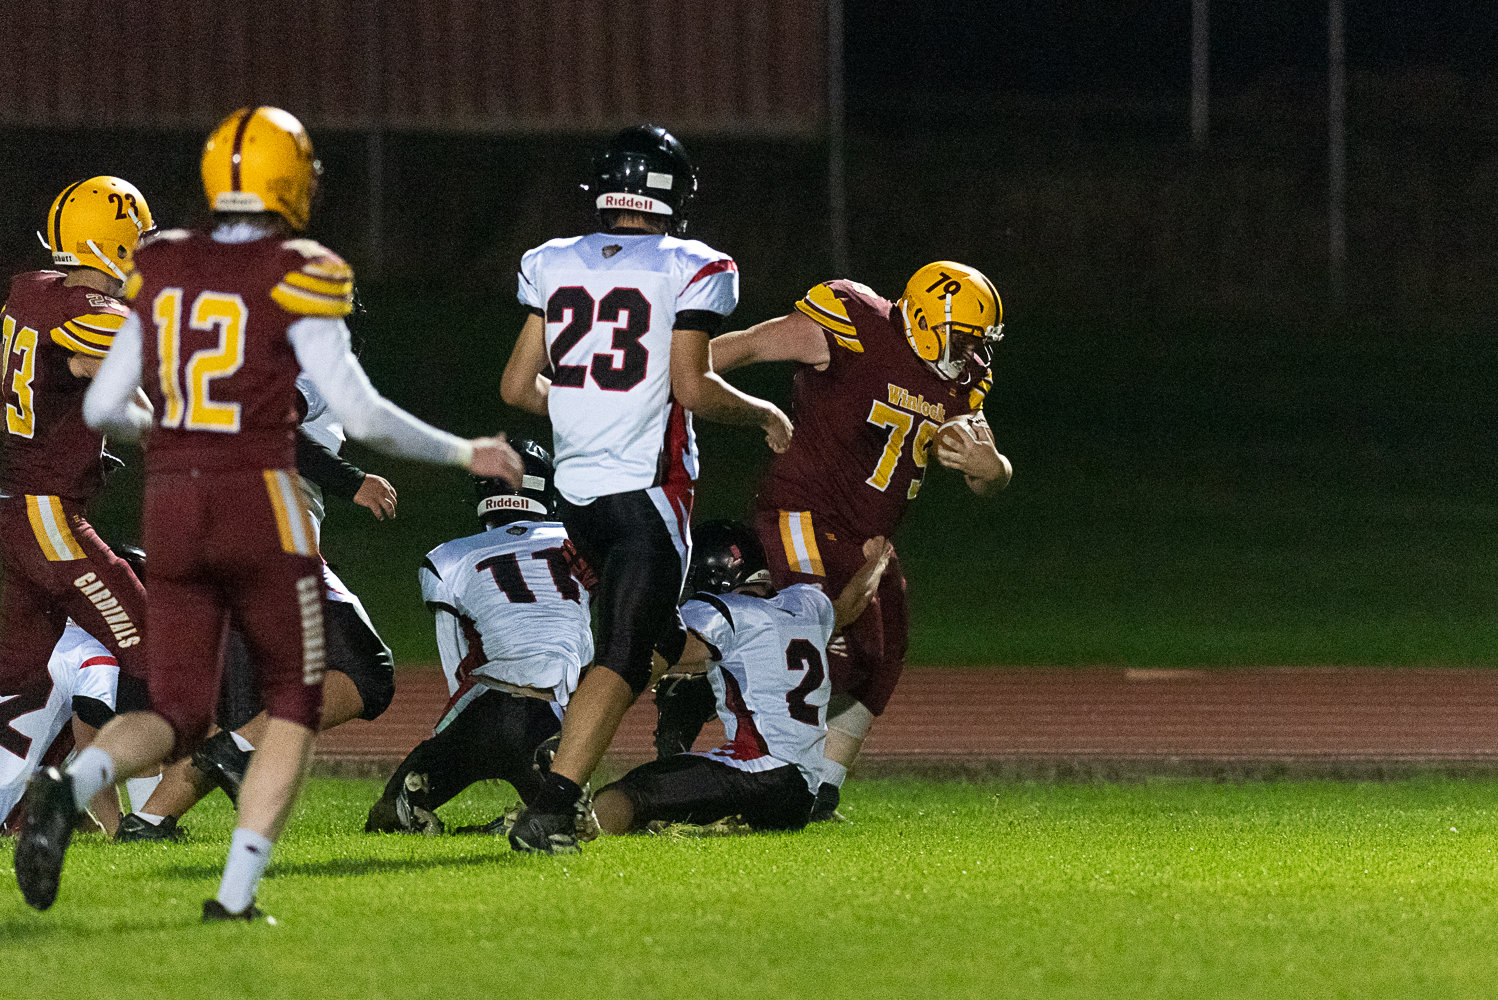 Winlock offensive lineman Austin Allen leaves a trail of Oakville defenders in his wake on a 17-yard rumble in the first half of the Cardinals' 36-28 win over the Acorns on Oct. 7.